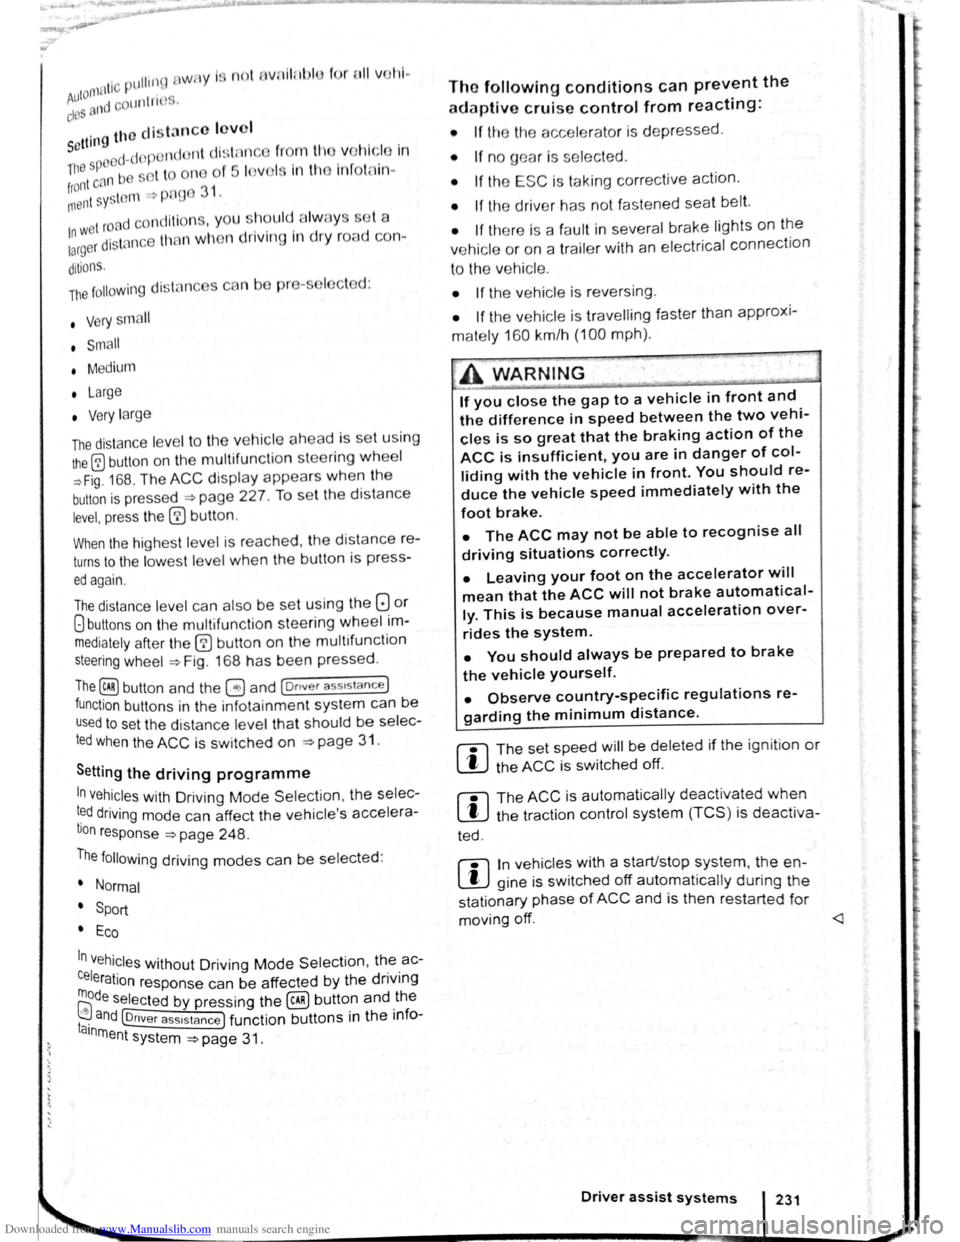 VOLKSWAGEN SCIROCCO 2010  Owners Manual Downloaded from www.Manualslib.com manuals search engine ,,nti pttllinfl W• y I not wnllniJI  for tdl vo h l-
fltllOI  · and cOtllltJJ( ciOS · 
. g th o clist::tnco lo vo l sett Ill 
P d -d O I n